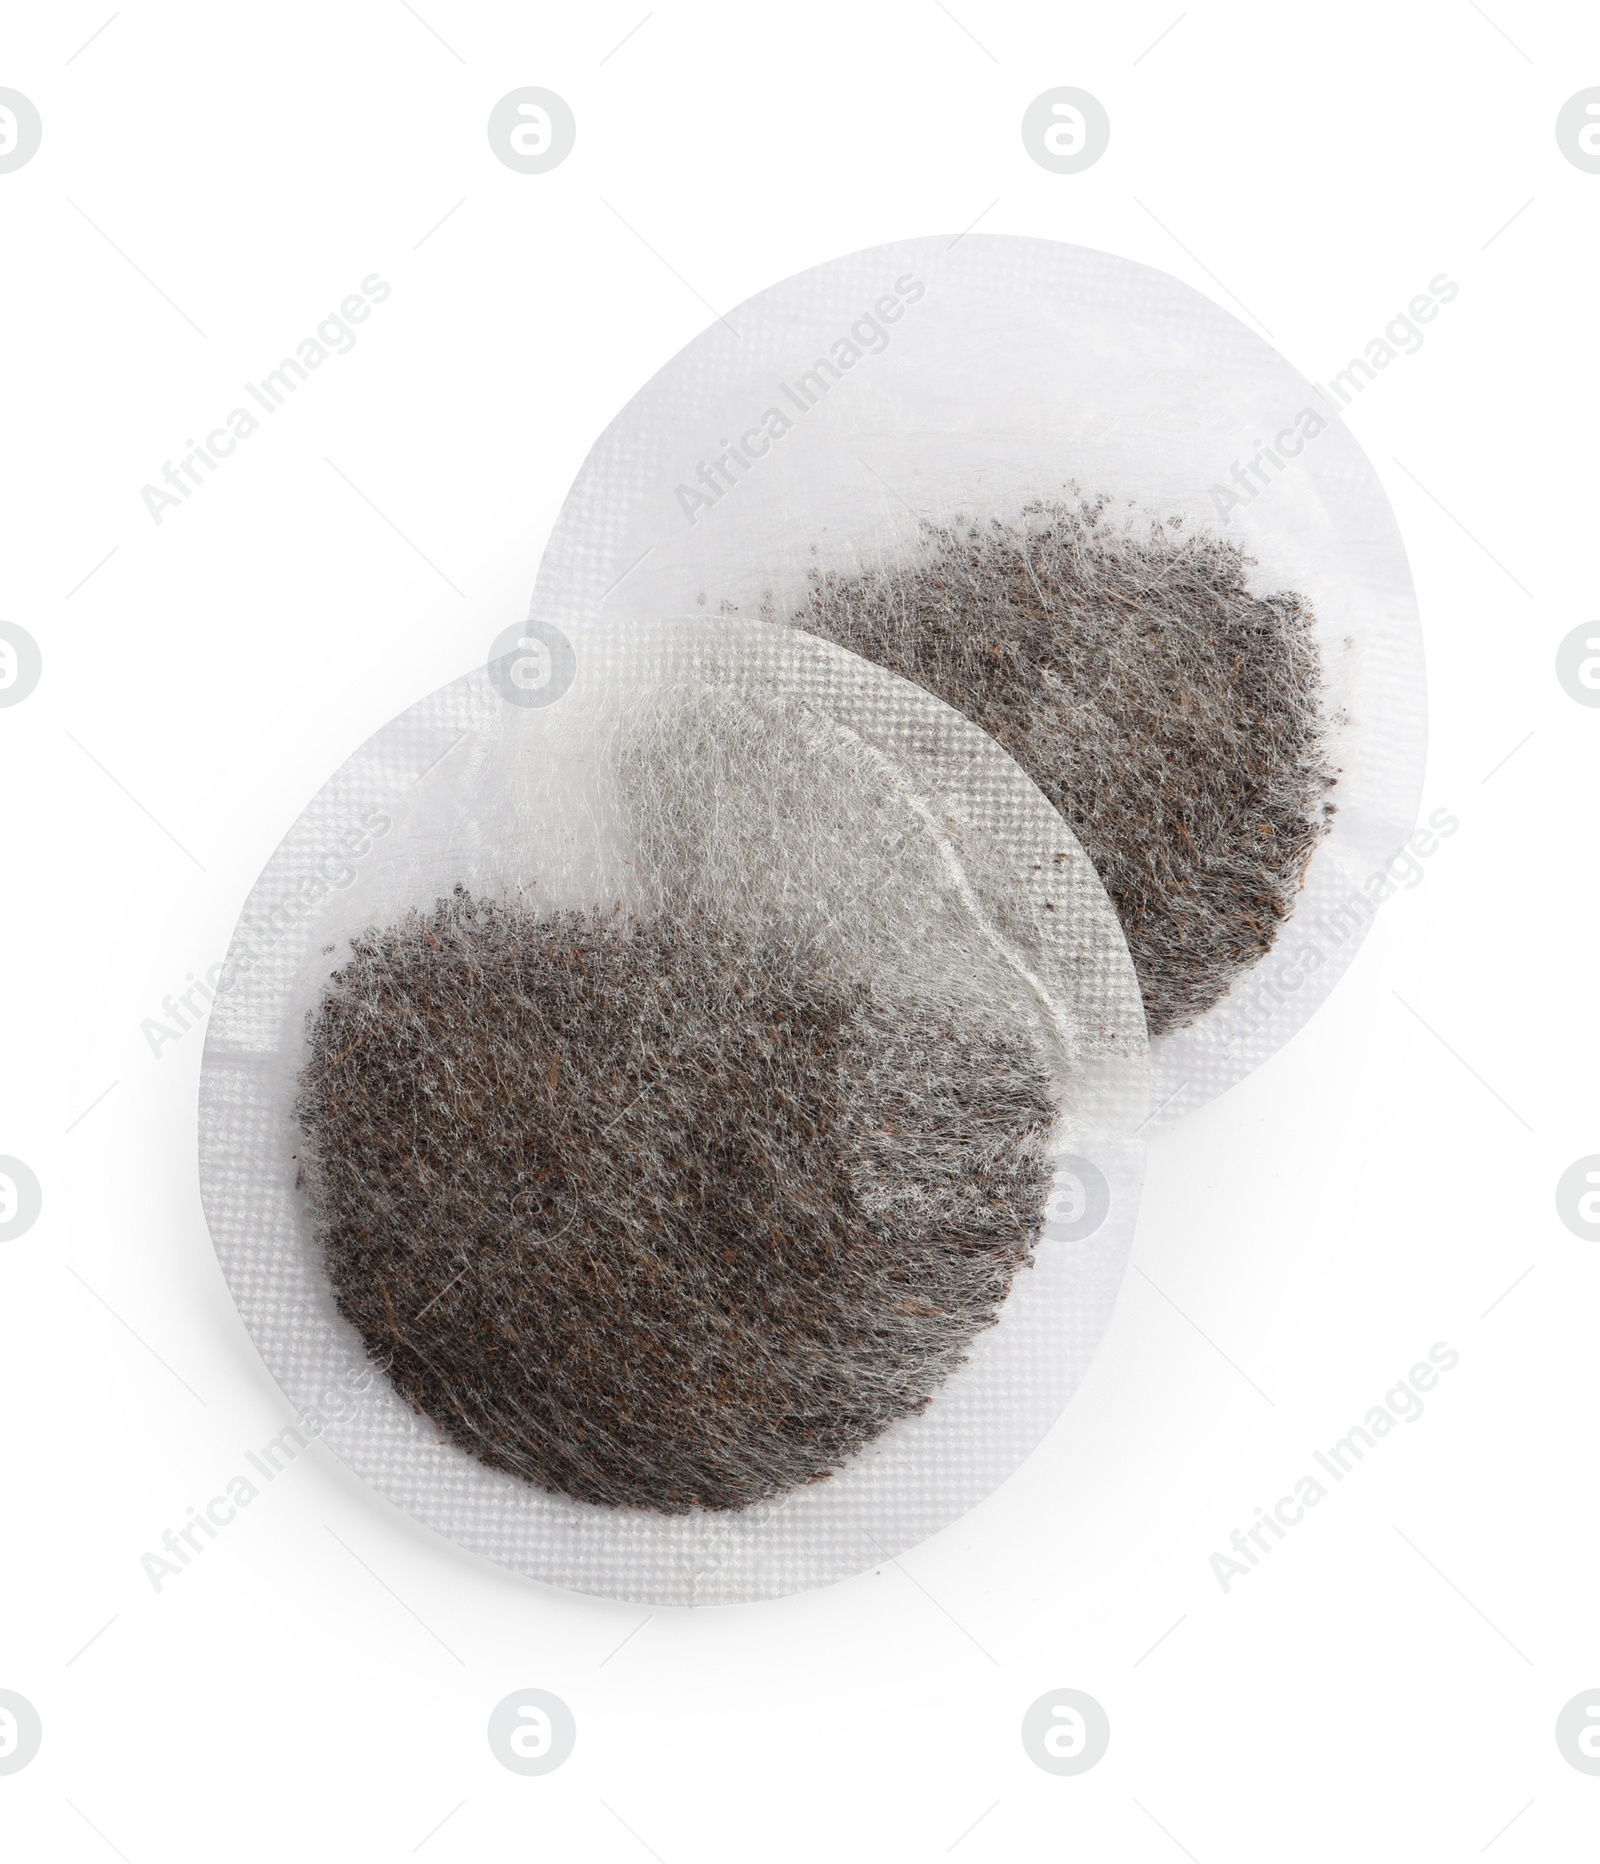 Photo of New round tea bags on white background, top view